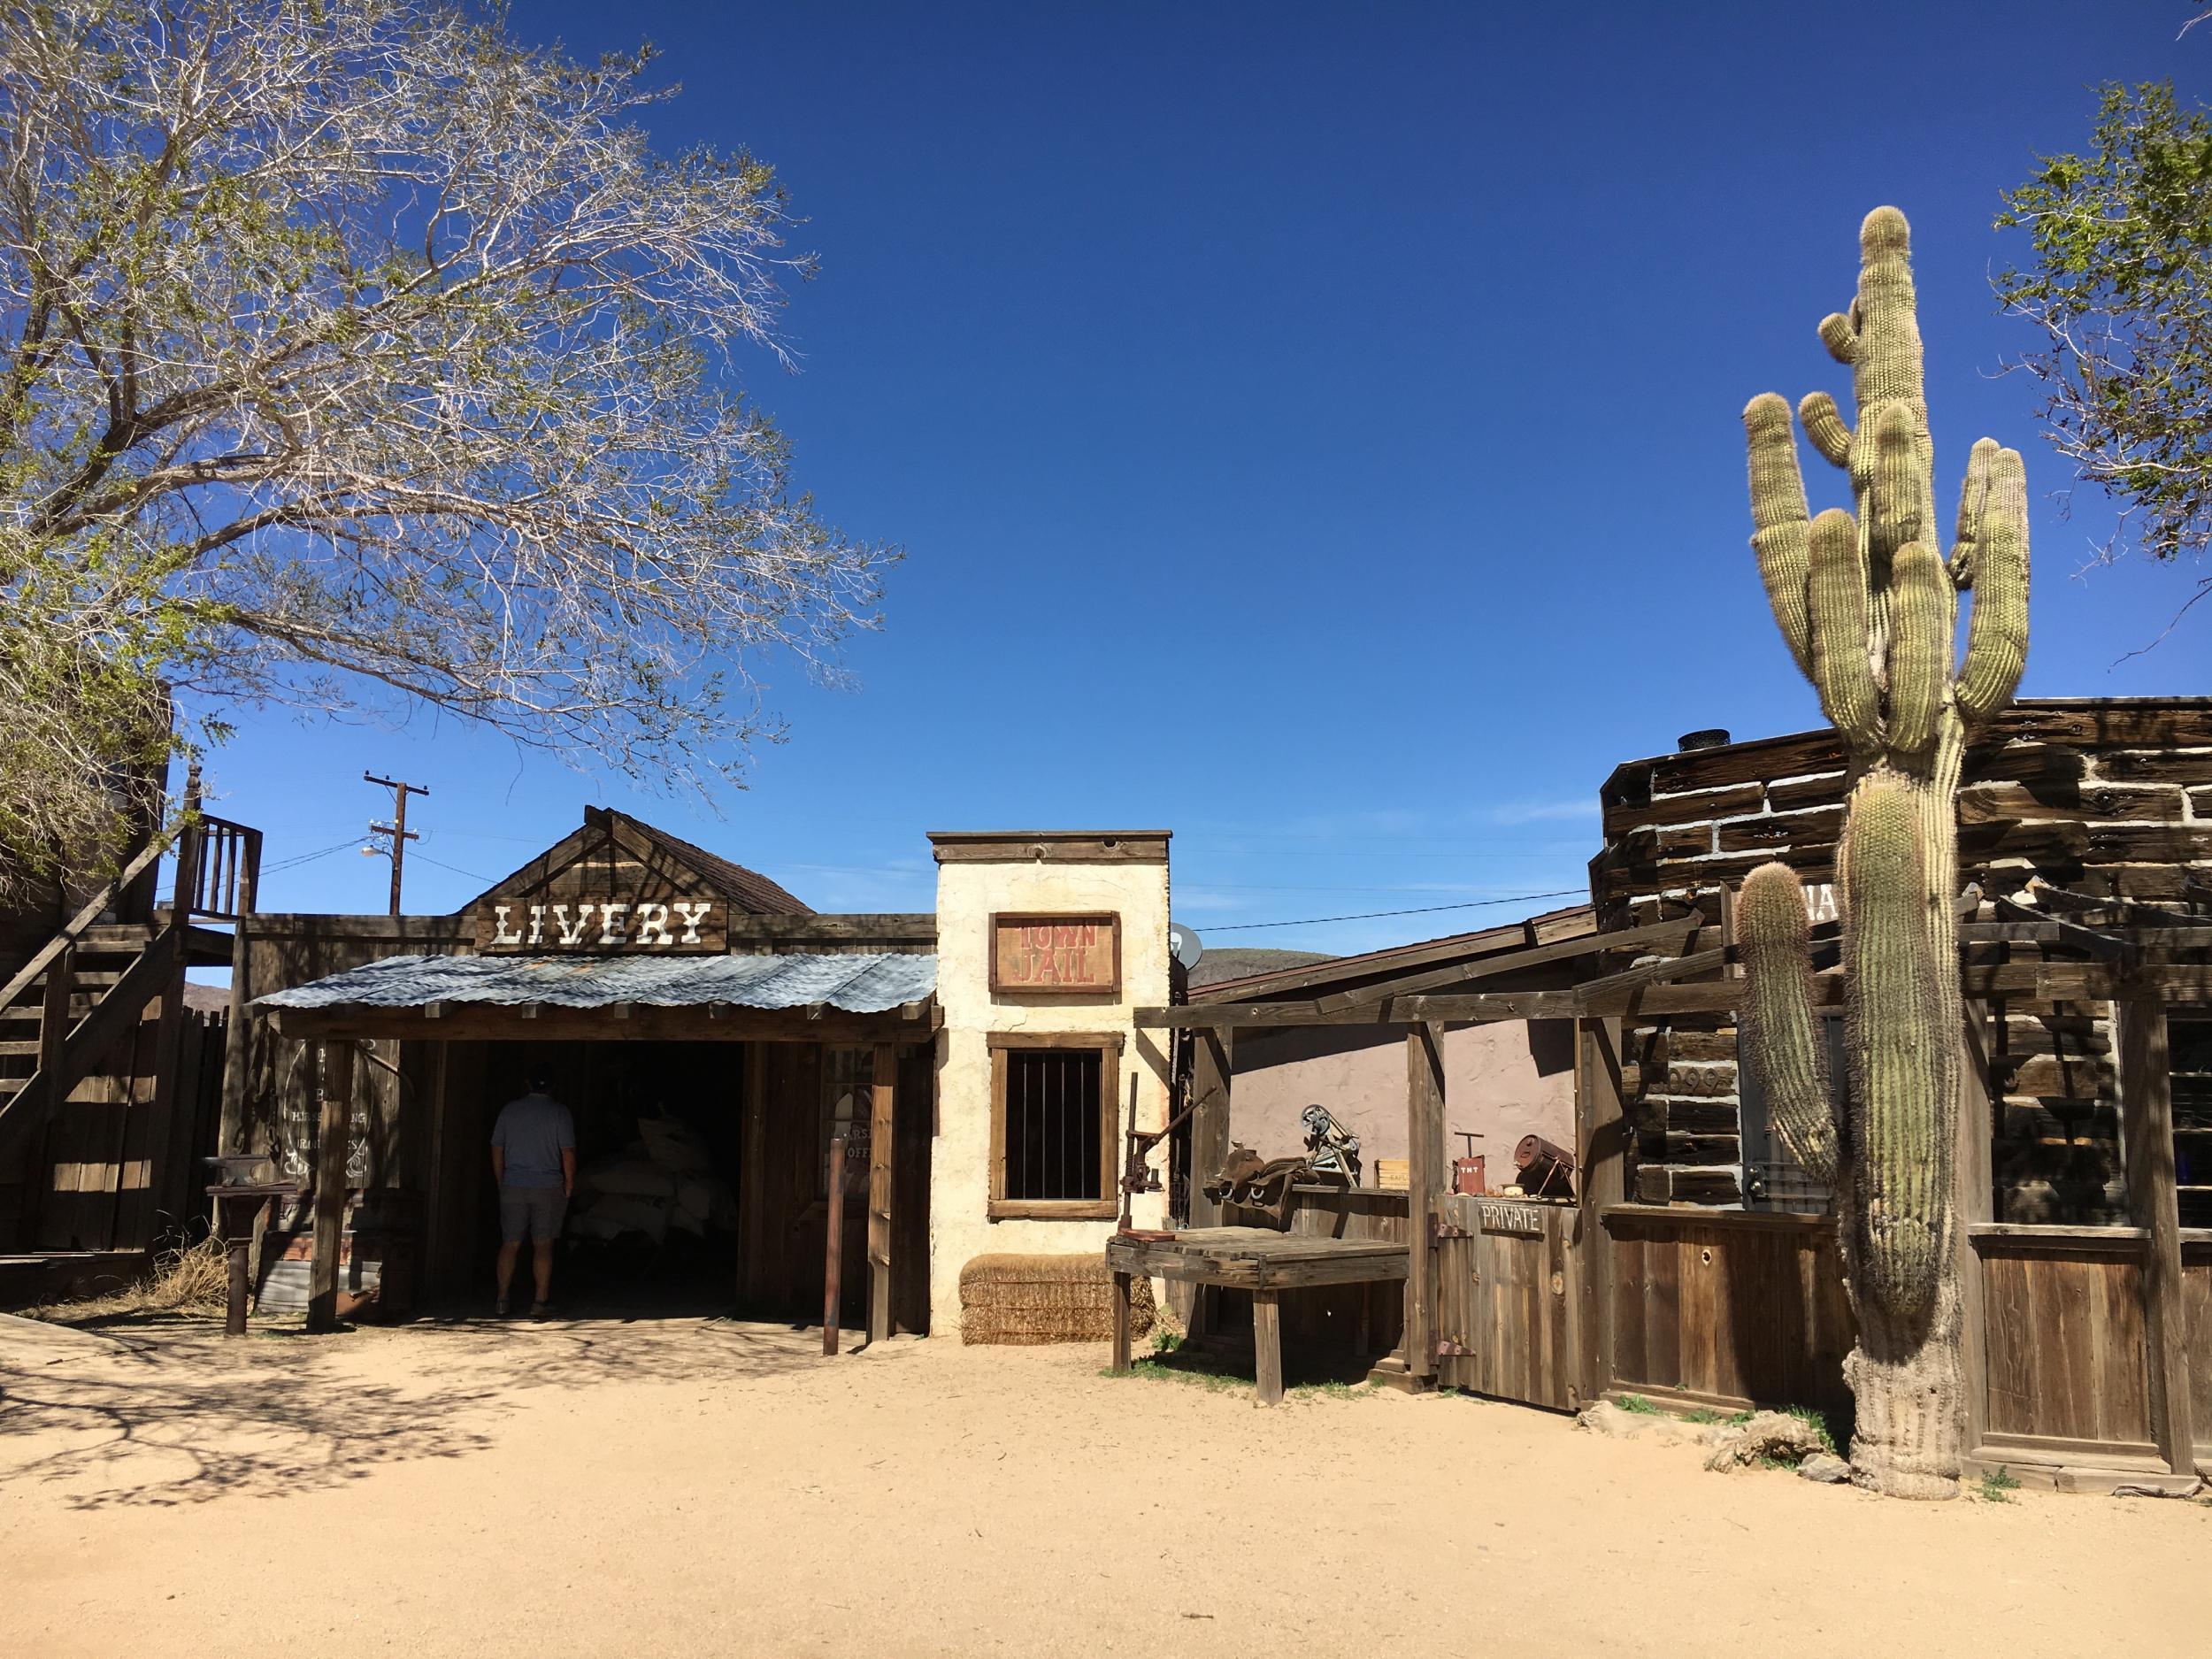 Pioneertown’s ‘livery store’